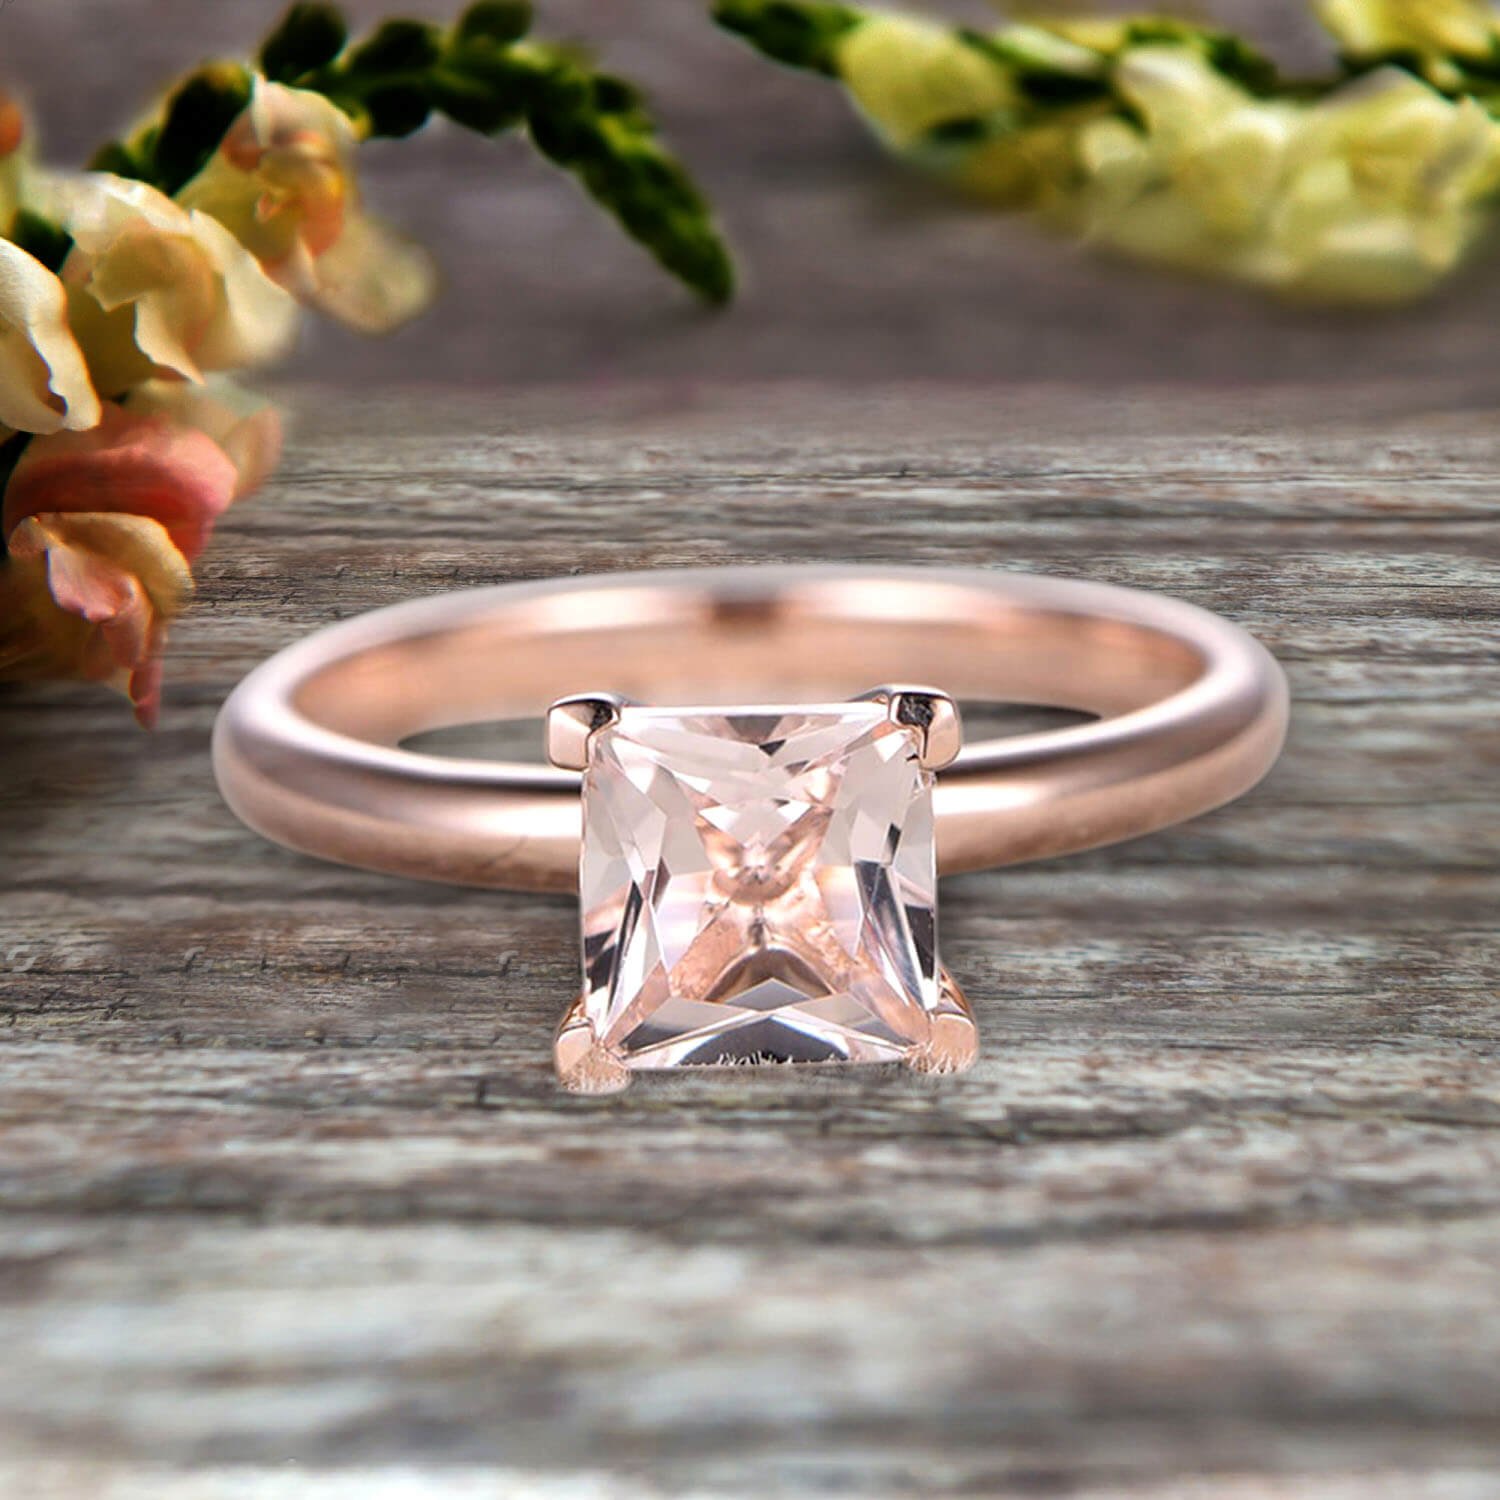 JeenJewels Startling Morganite Solitaire Engagement Ring On 10k Rose Gold 1.3 Carat 7mm Cushion Cut Heart Prong Promise Anniversary Gift